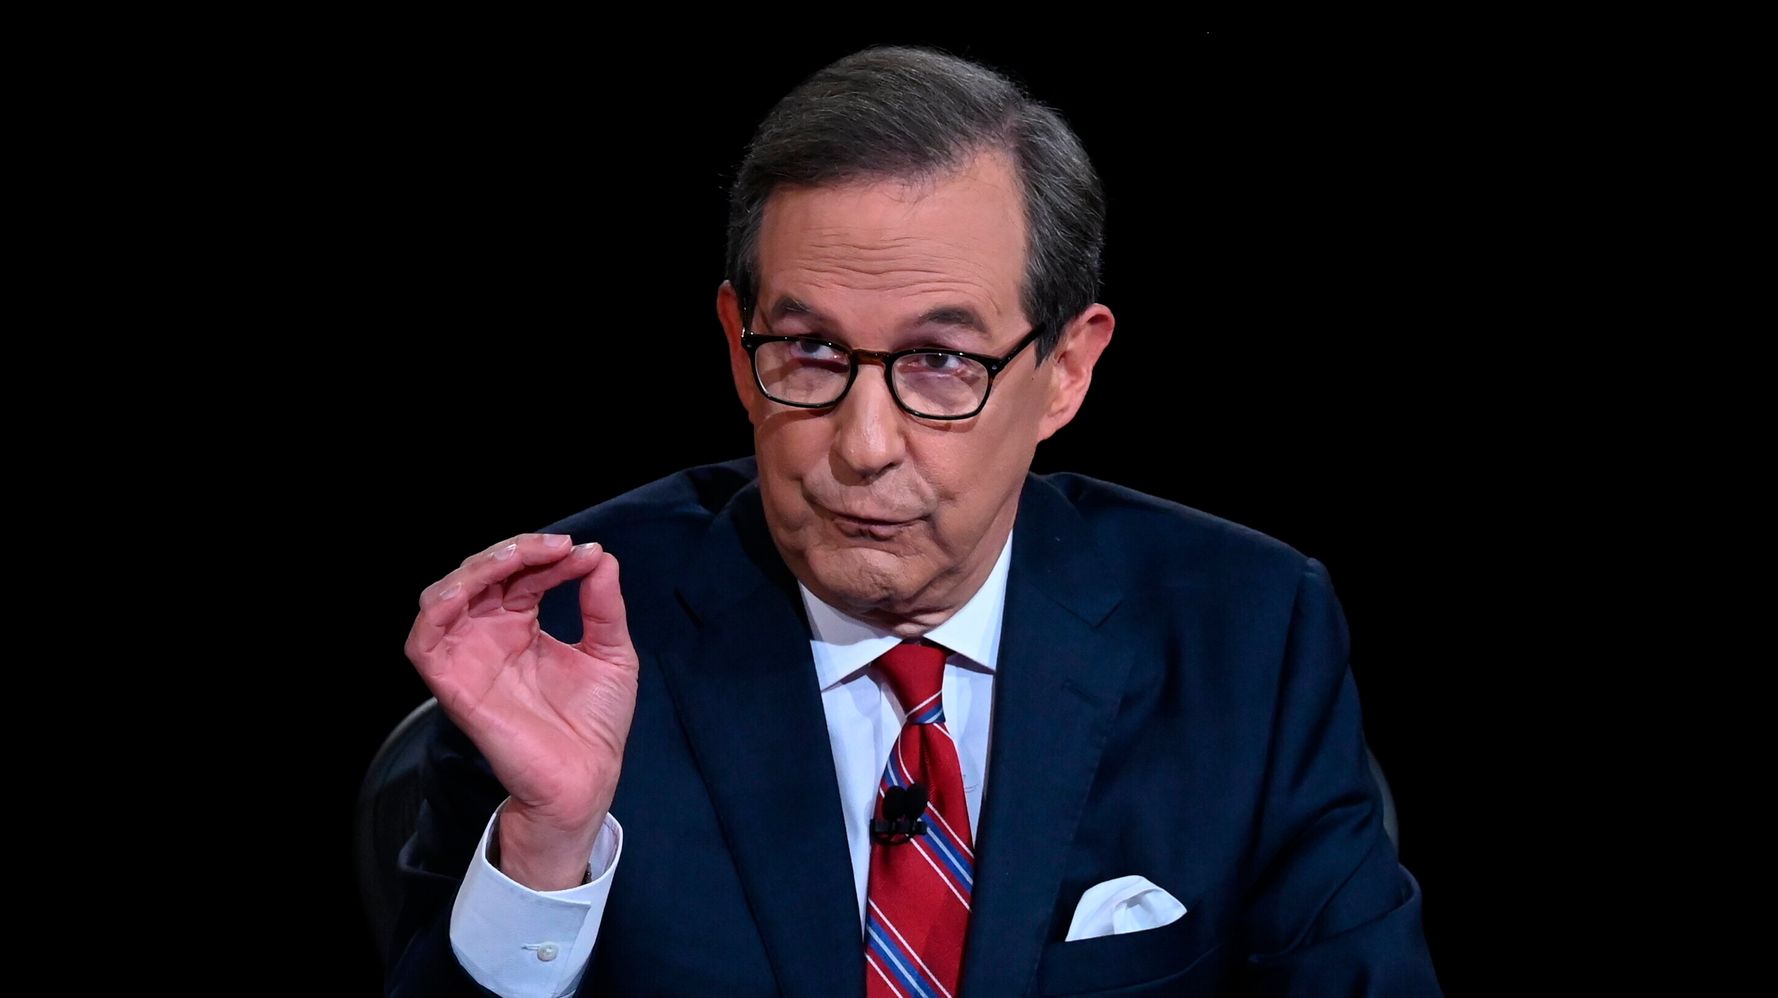 Chris Wallace: What Got Him ‘Pissed Off’ About The First Debate